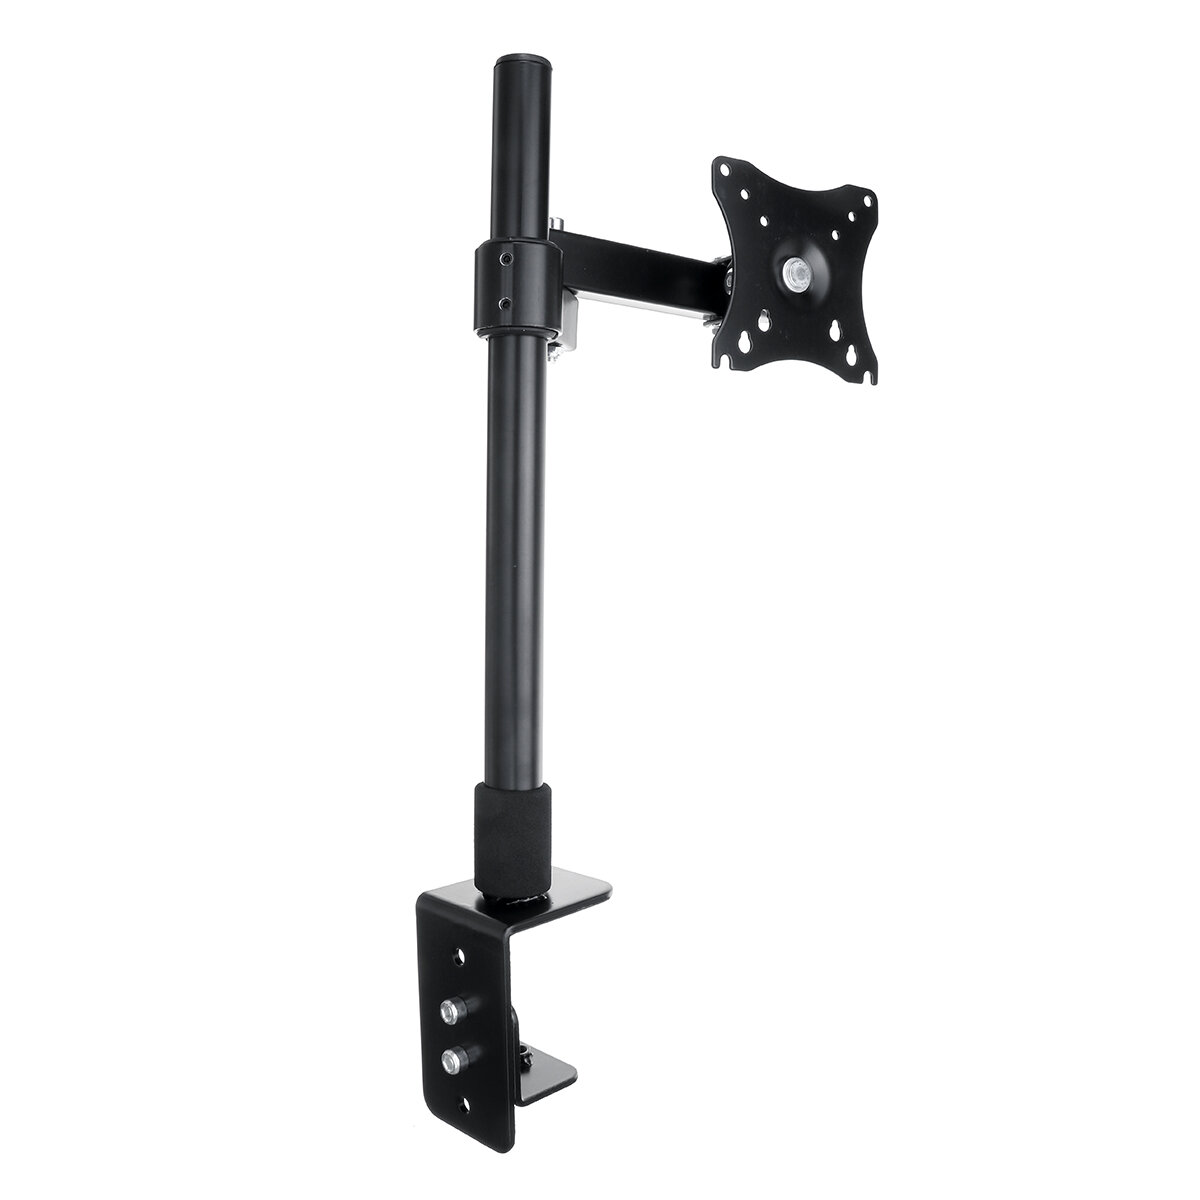 Image of Single Arm Desk Mount LCD Computer Monitor Bracket Clamp Stand 14-27 inch Screen TV Bracket